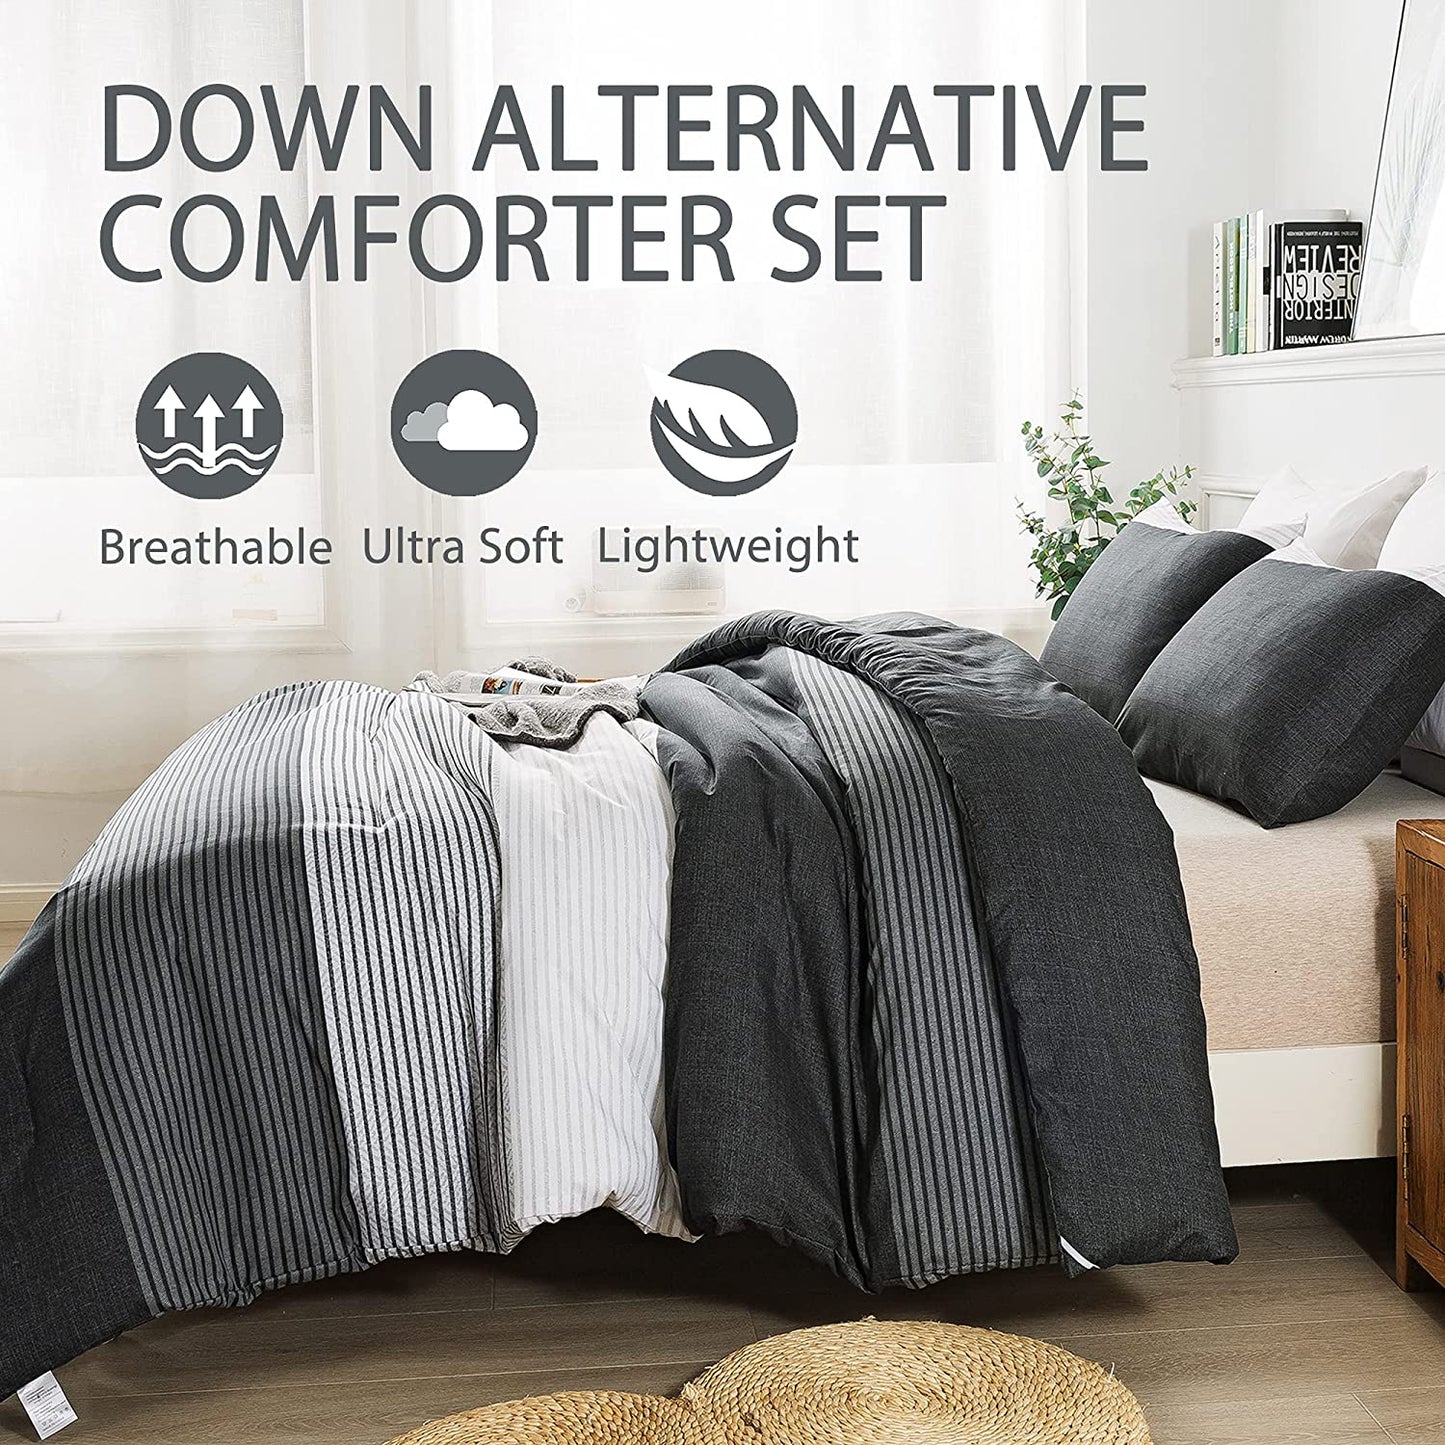 Black Comforter King Size, 3 Pieces Black White Gray Patchwork Striped Comforter (104X90 Inch), Soft Microfiber down Alternative King Comforter Bedding Sets with Corner Loops